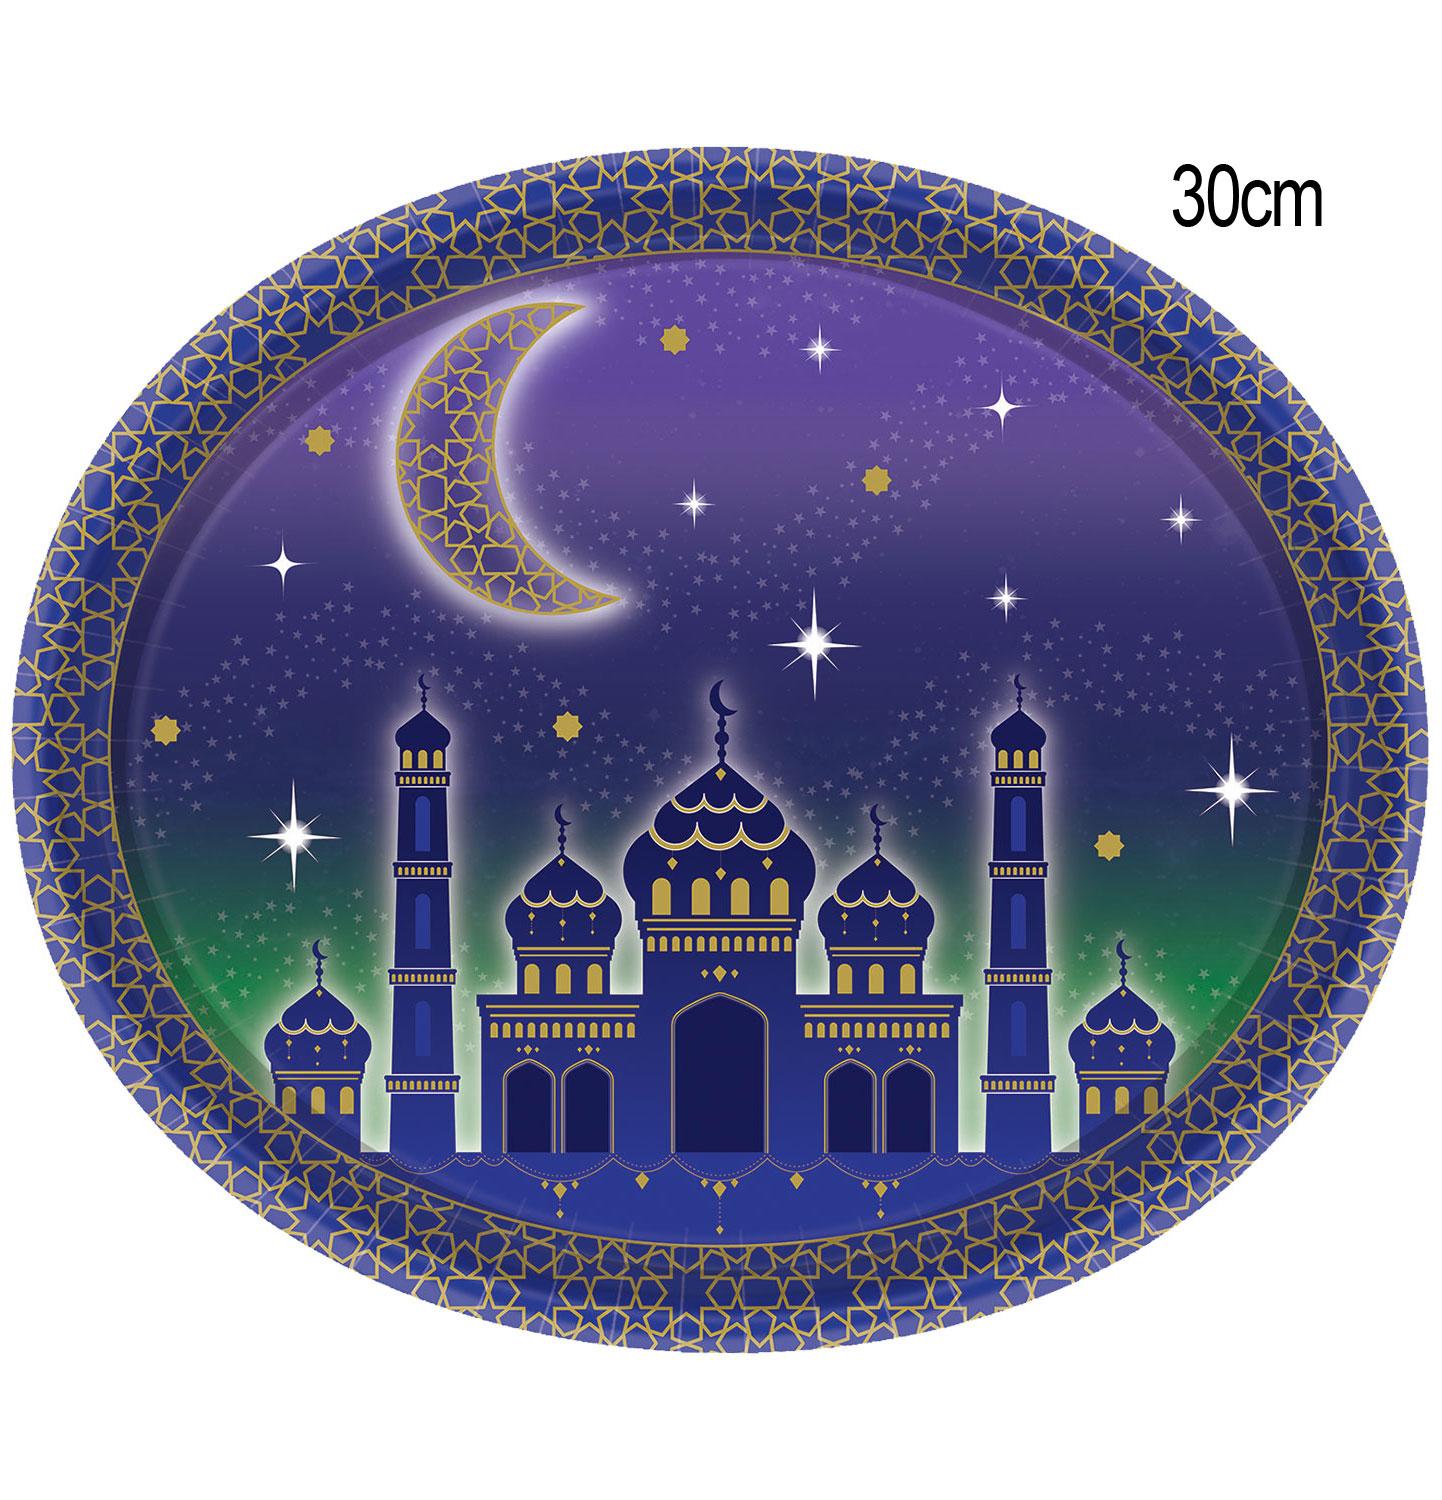 Eid Celebrations 30cm Paper Platters pk8 by Amscan 591962 available here at Karnival Costumes online party shop